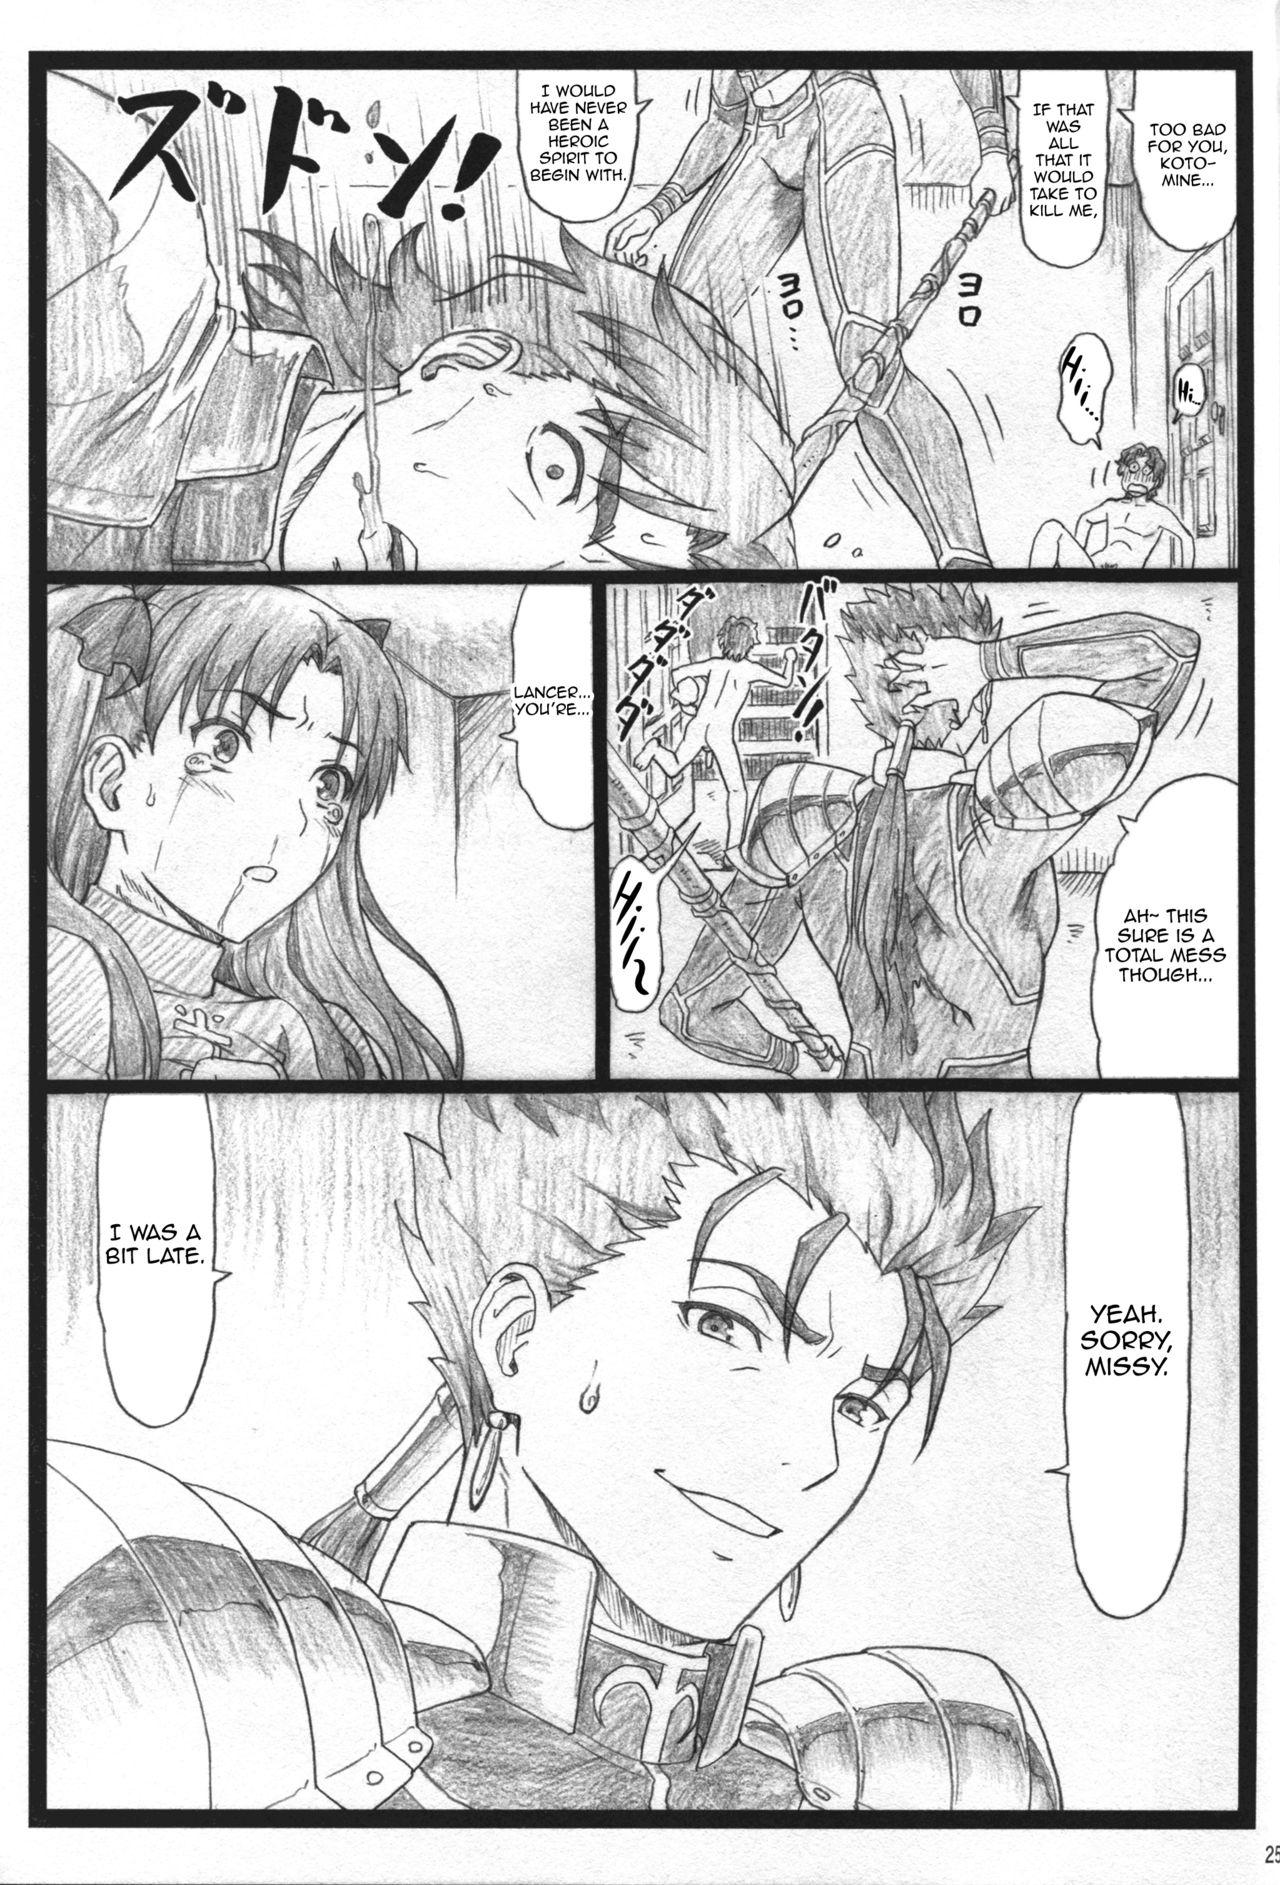 Step Sister Rin to Shite... | With Rin... - Fate stay night Big Butt - Page 25